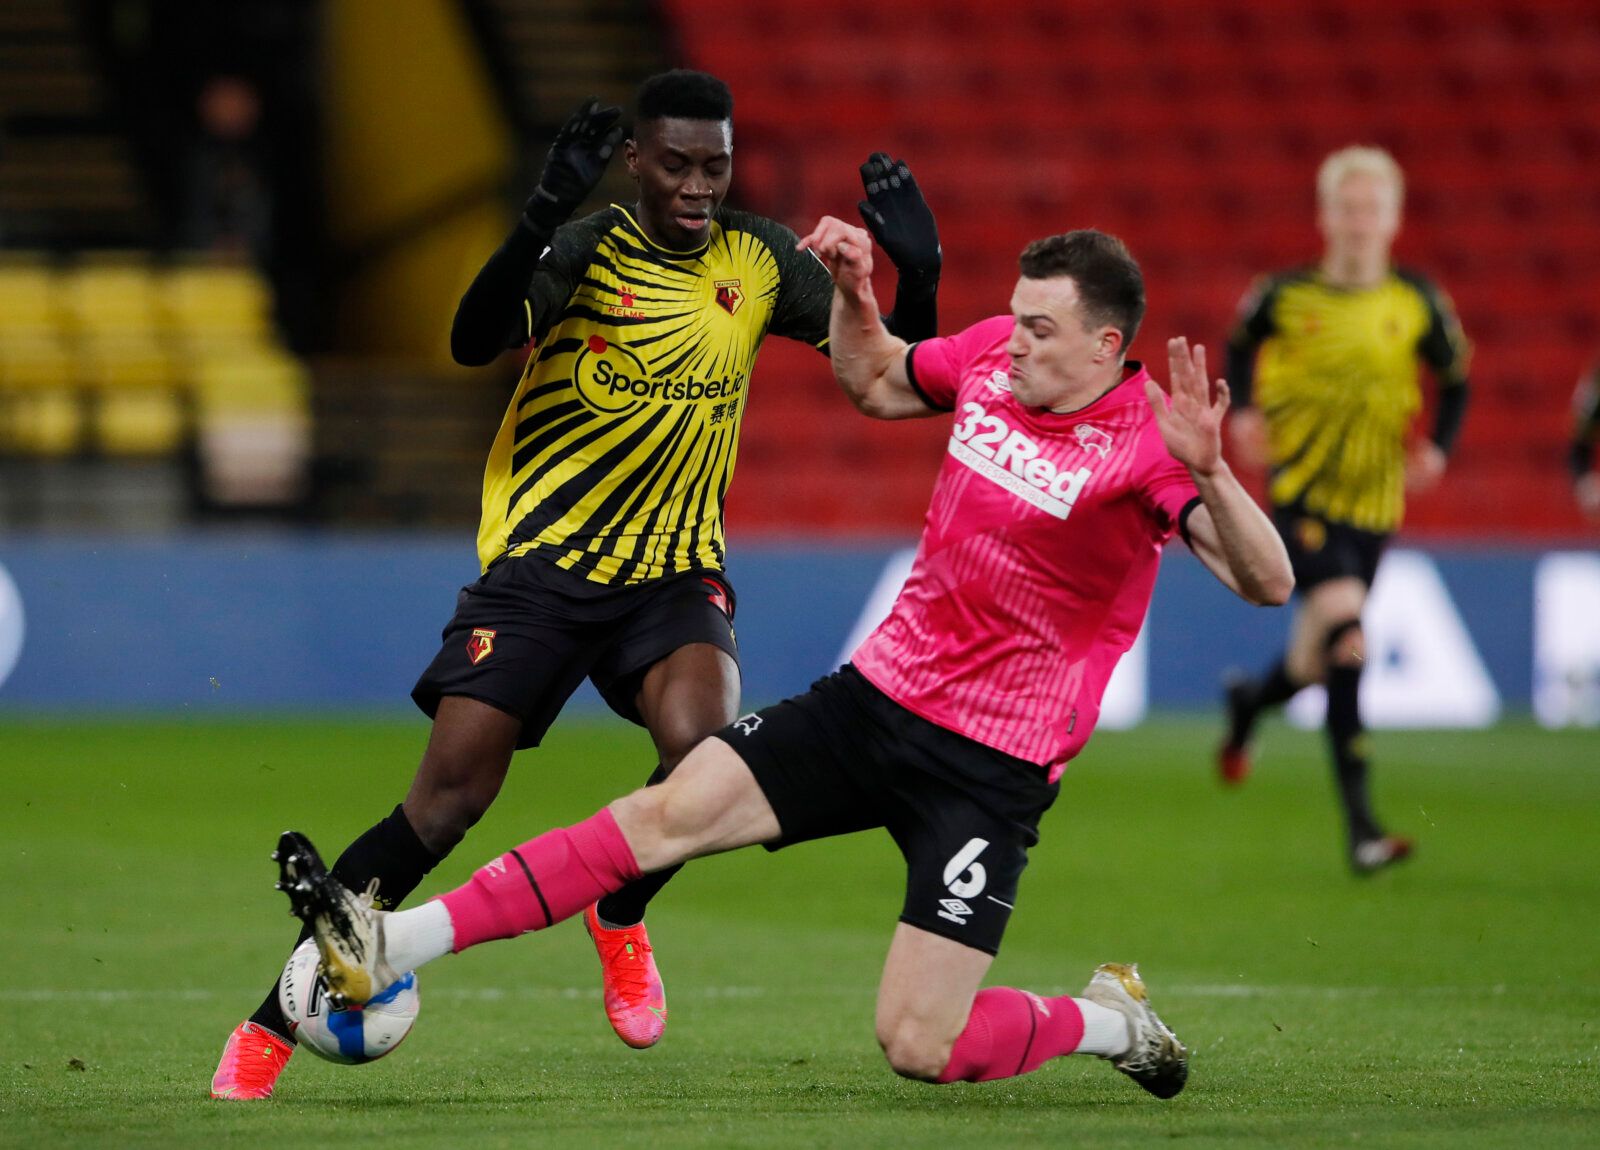 Soccer Football - Championship -  Watford v Derby County - Vicarage Road, Watford, Britain - February 19, 2021 Watford’s Ismaila Sarr in action with Derby County's George Edmundson Action Images/Andrew Couldridge EDITORIAL USE ONLY. No use with unauthorized audio, video, data, fixture lists, club/league logos or 'live' services. Online in-match use limited to 75 images, no video emulation. No use in betting, games or single club /league/player publications.  Please contact your account represent